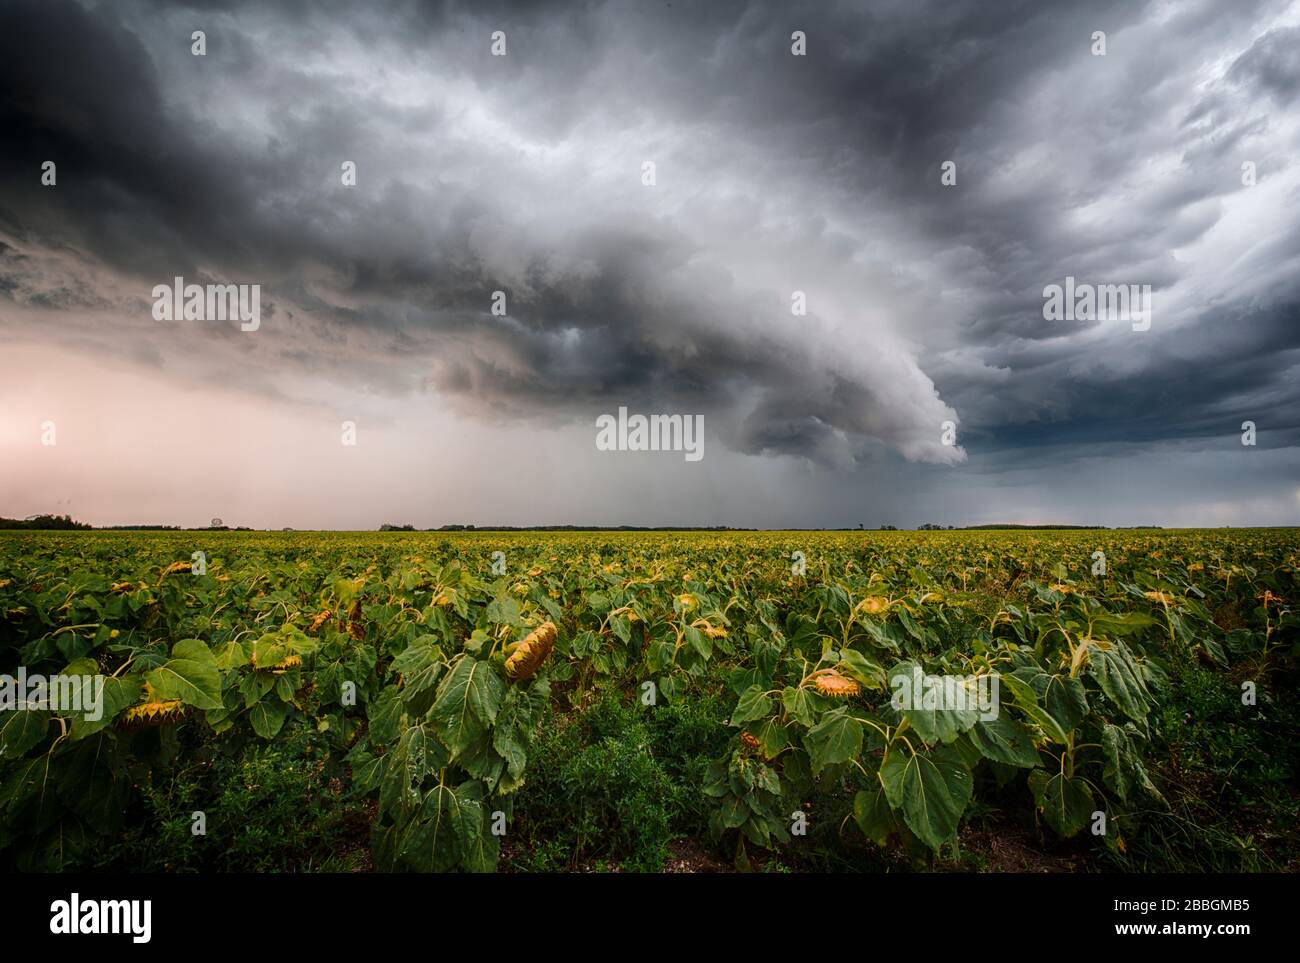 Storm forming shelf cloud over rural sunflower field in southern Manitoba Canada Stock Photo